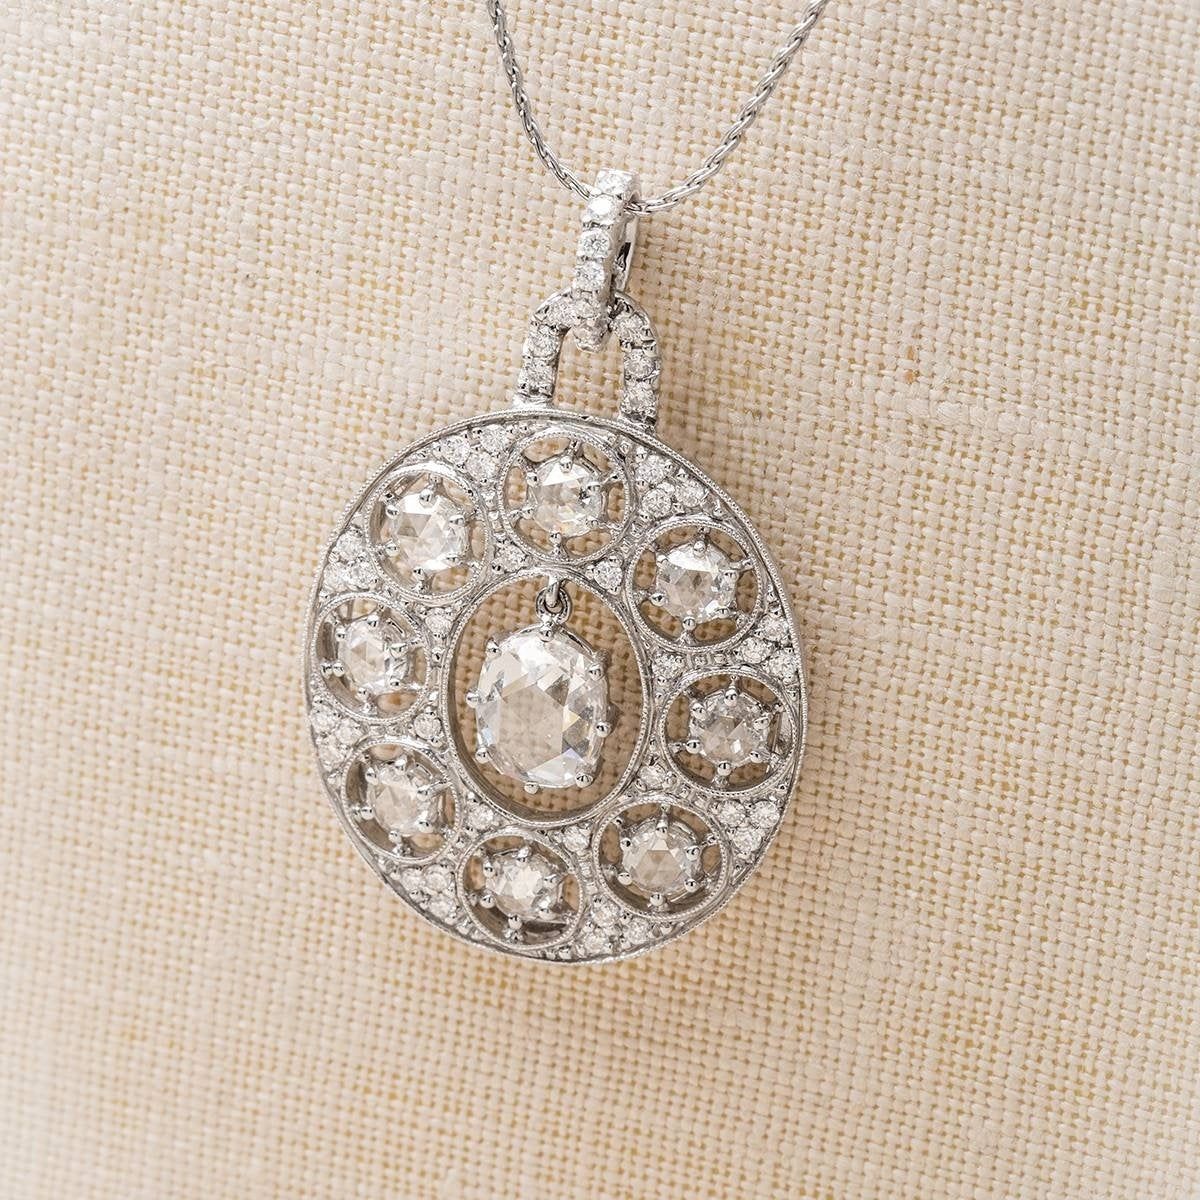 Vintage 18k Gold And Rose Cut Diamond Pendant Throughout Best And Newest Round Brilliant Diamond Straightline Necklaces (View 17 of 25)